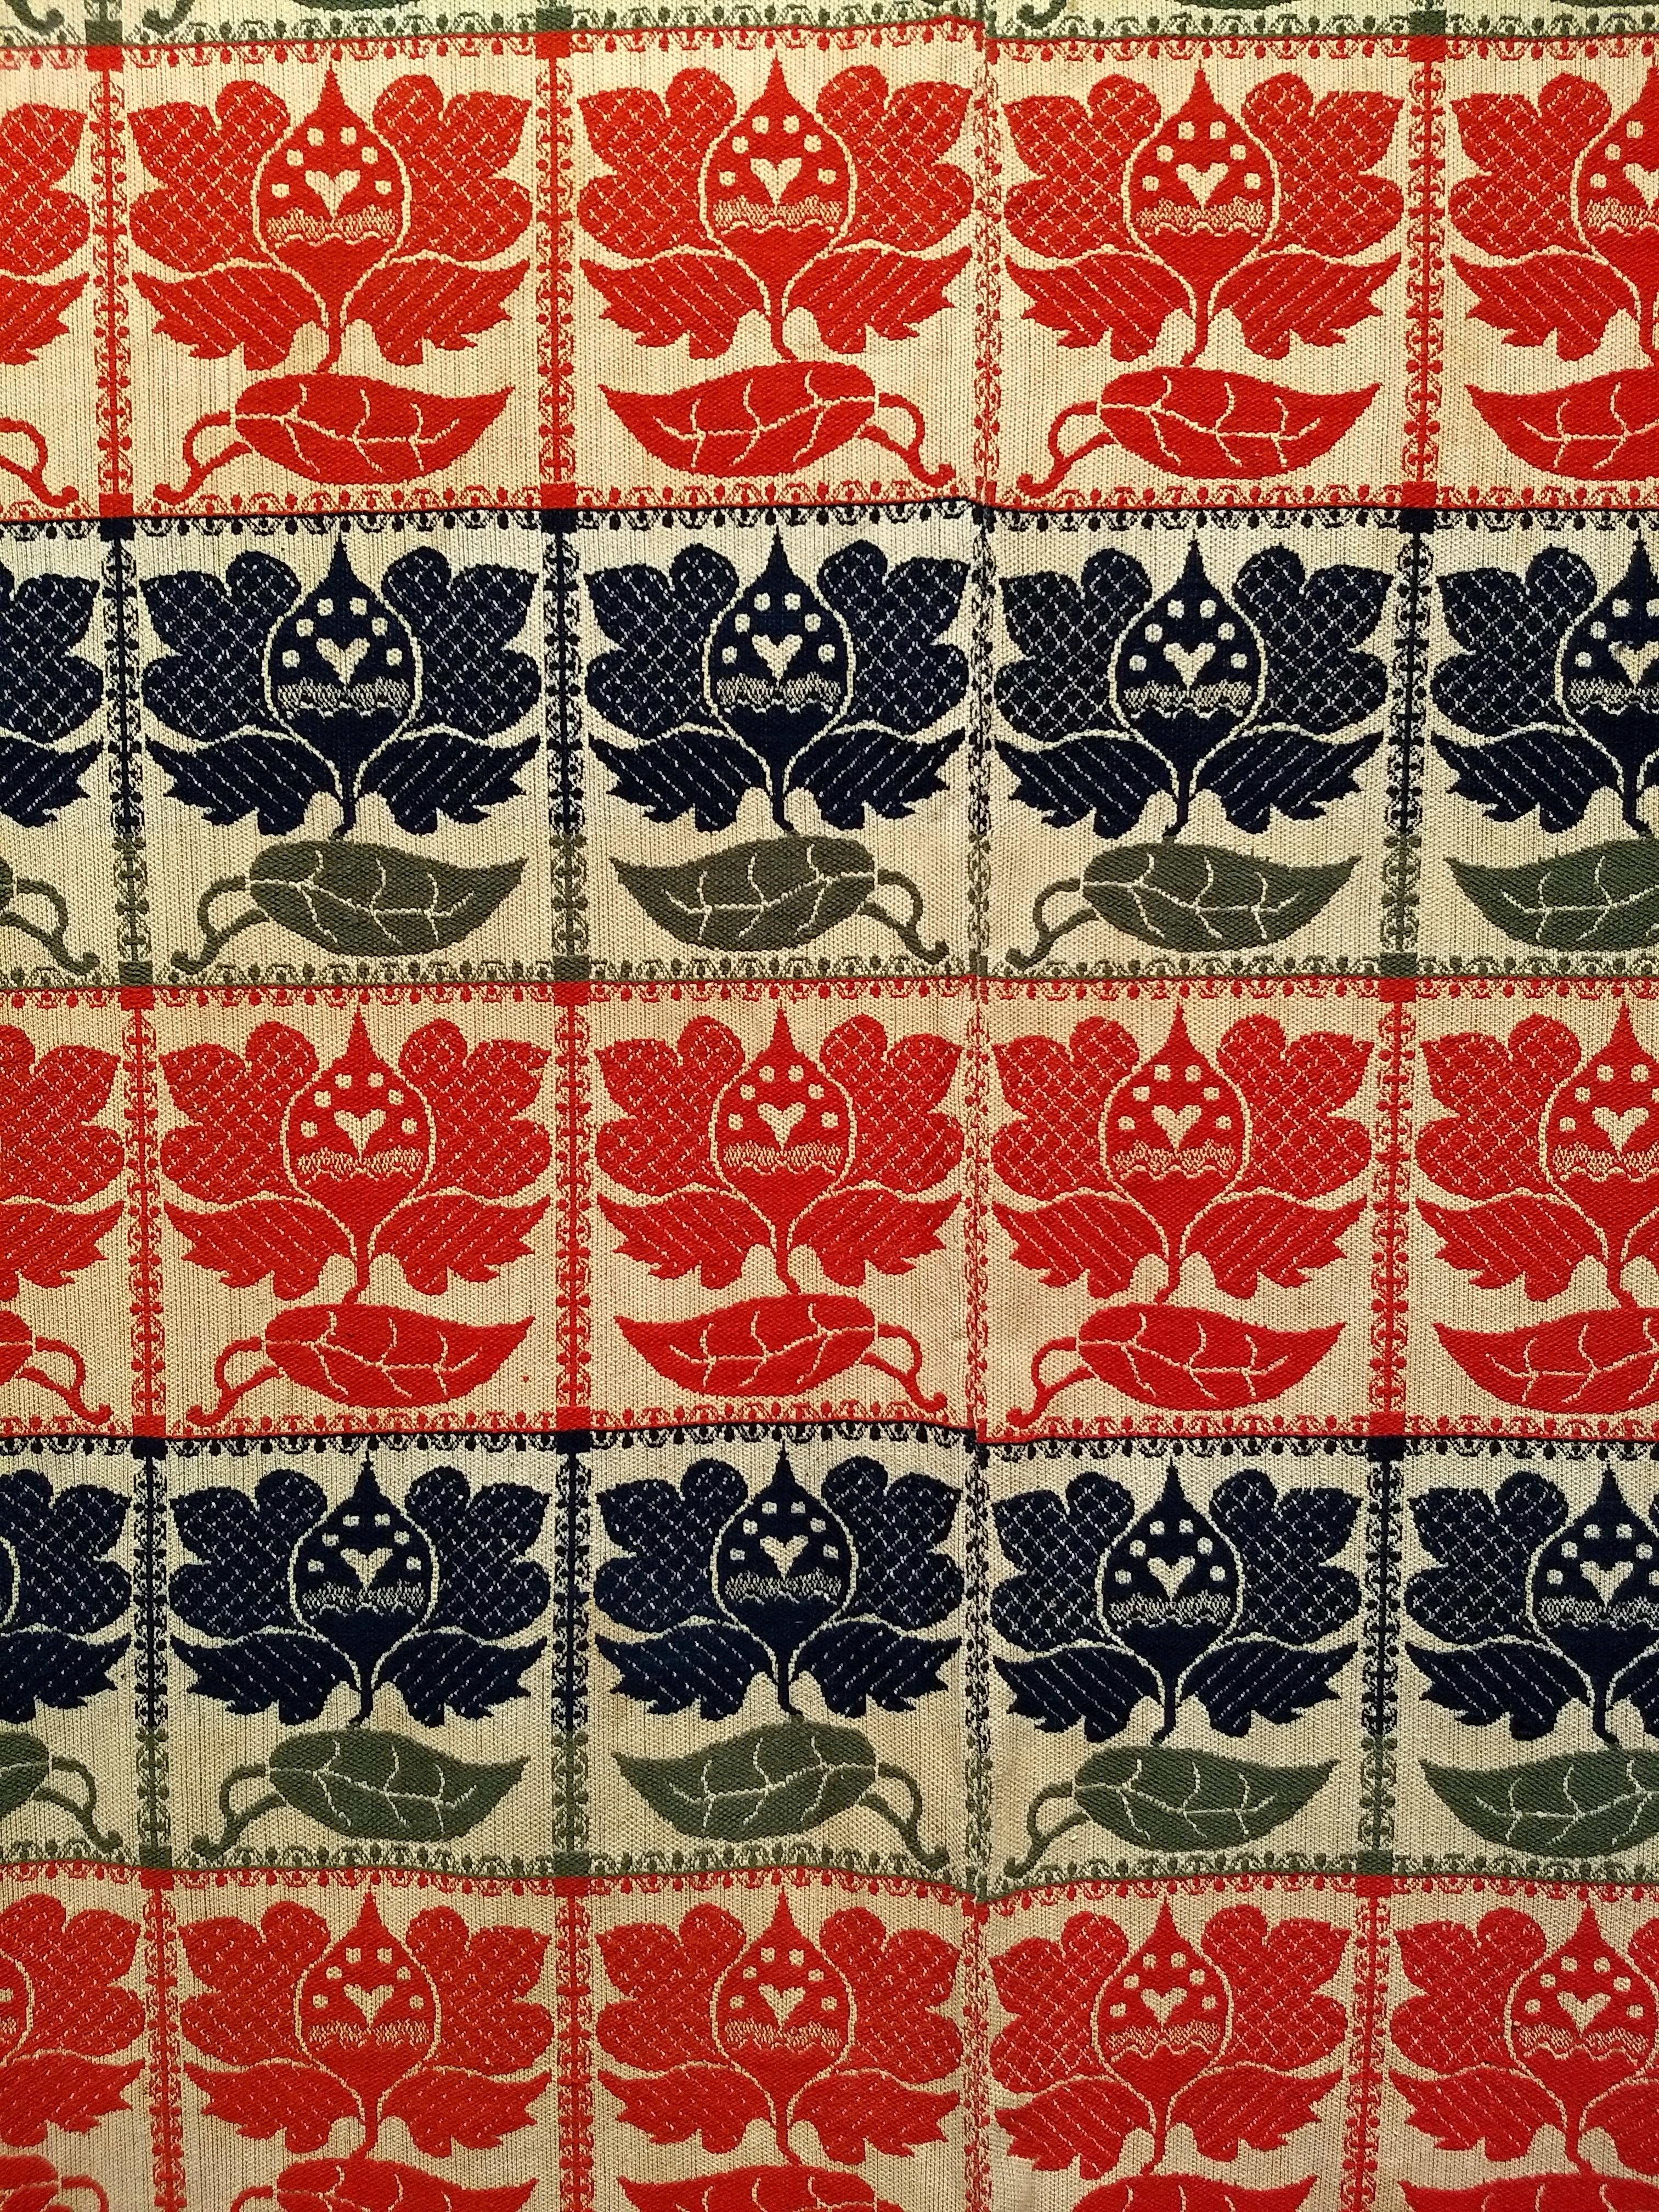 woven coverlets 1800s